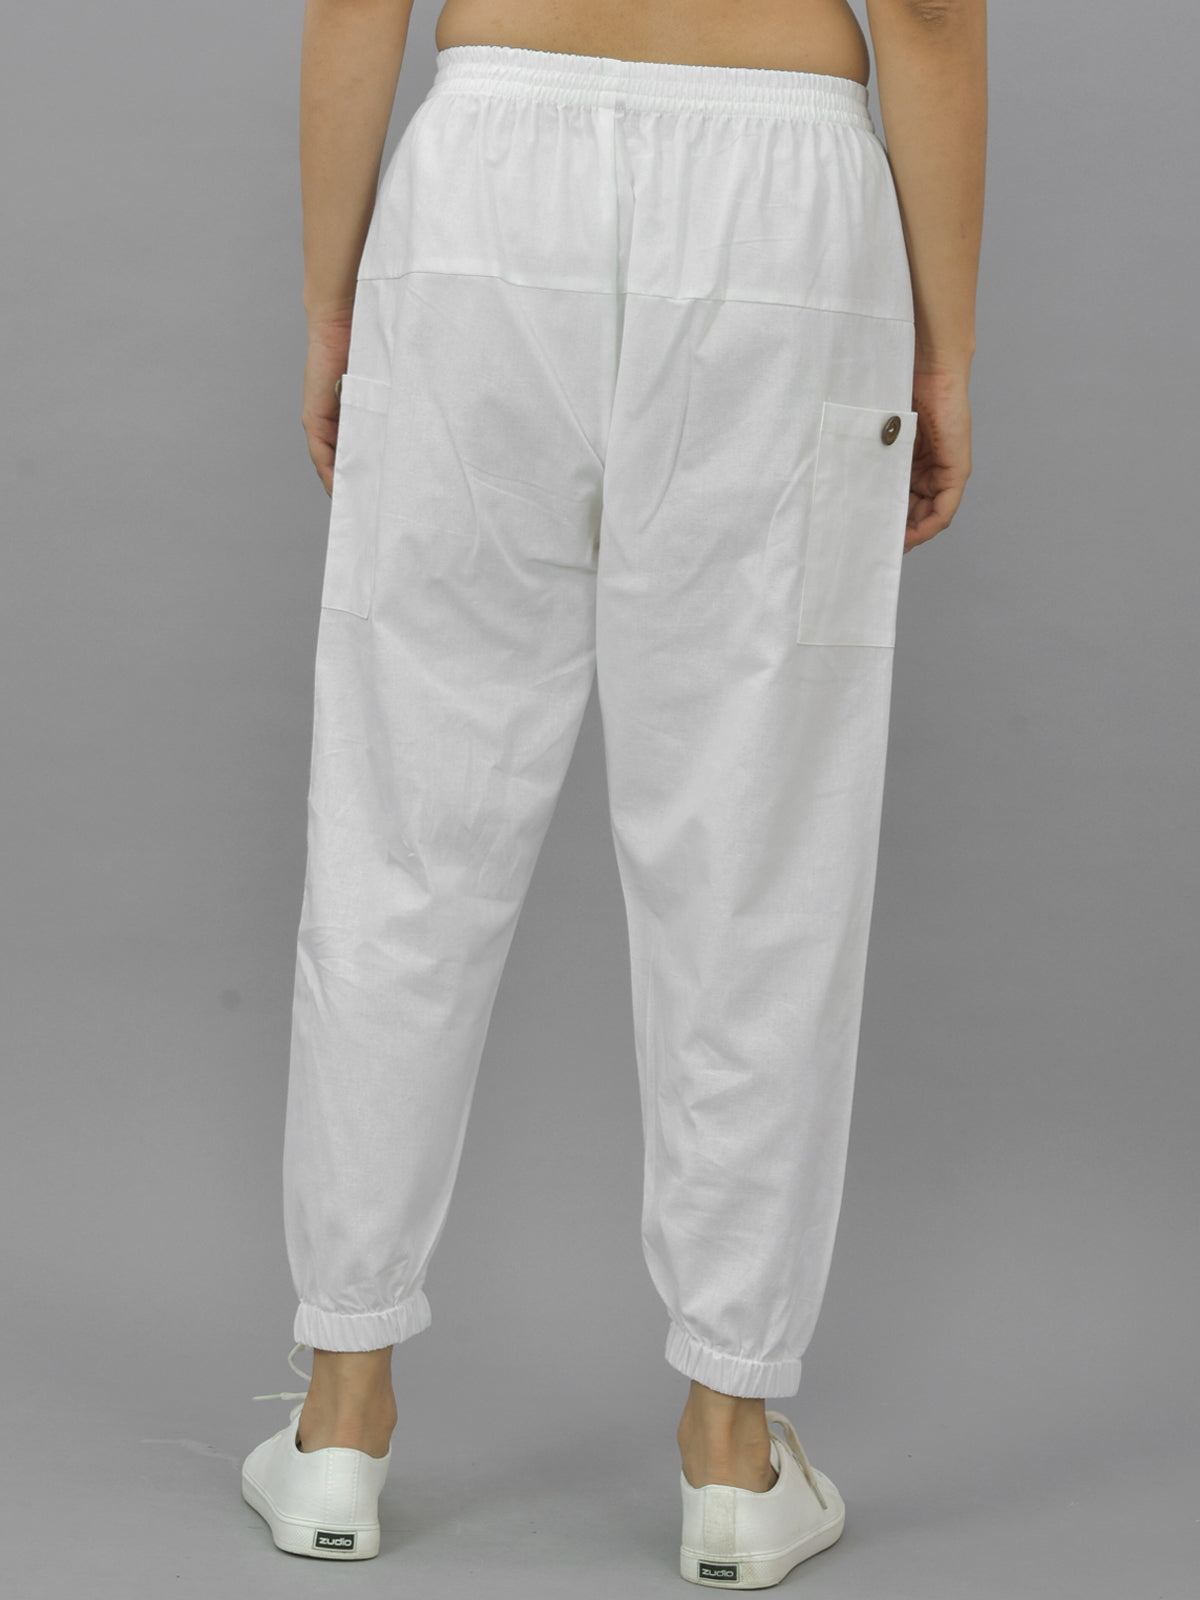 Combo Pack Of Womens Melange Grey And White Four Pocket Cotton Cargo Pants